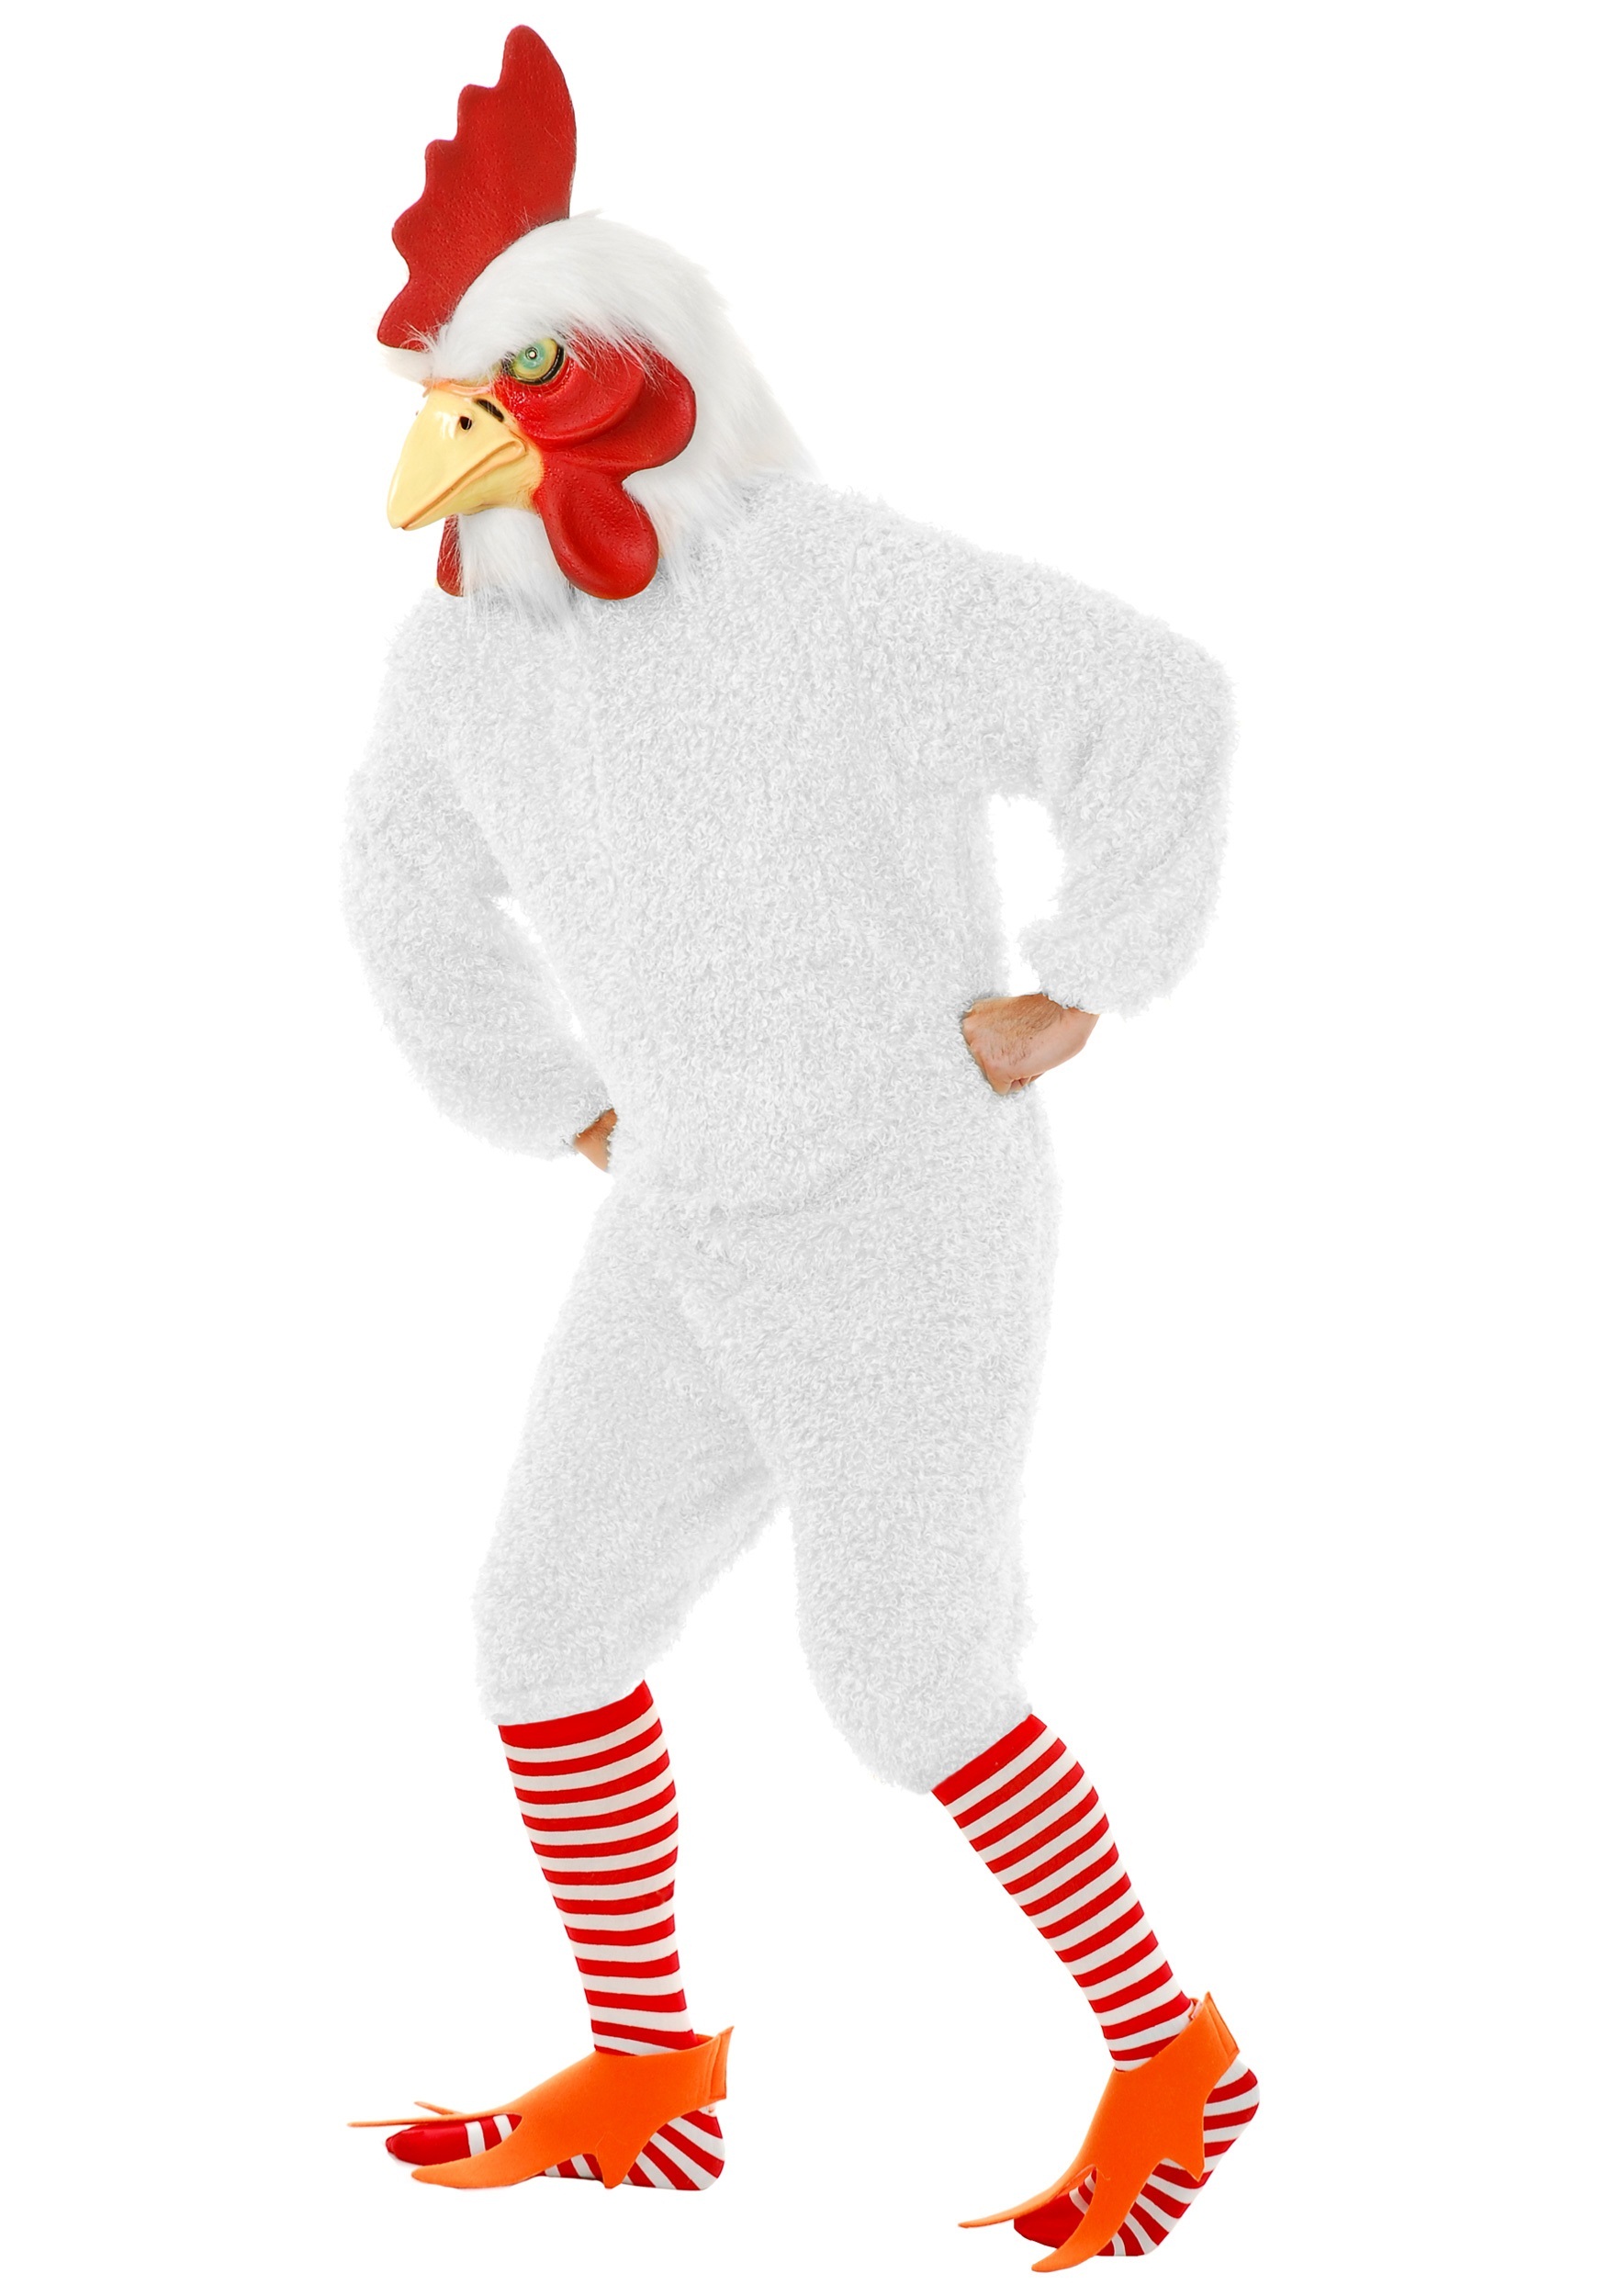 Photos - Fancy Dress Charades Plus Size White Rooster Costume For Adult Red/White/Yello